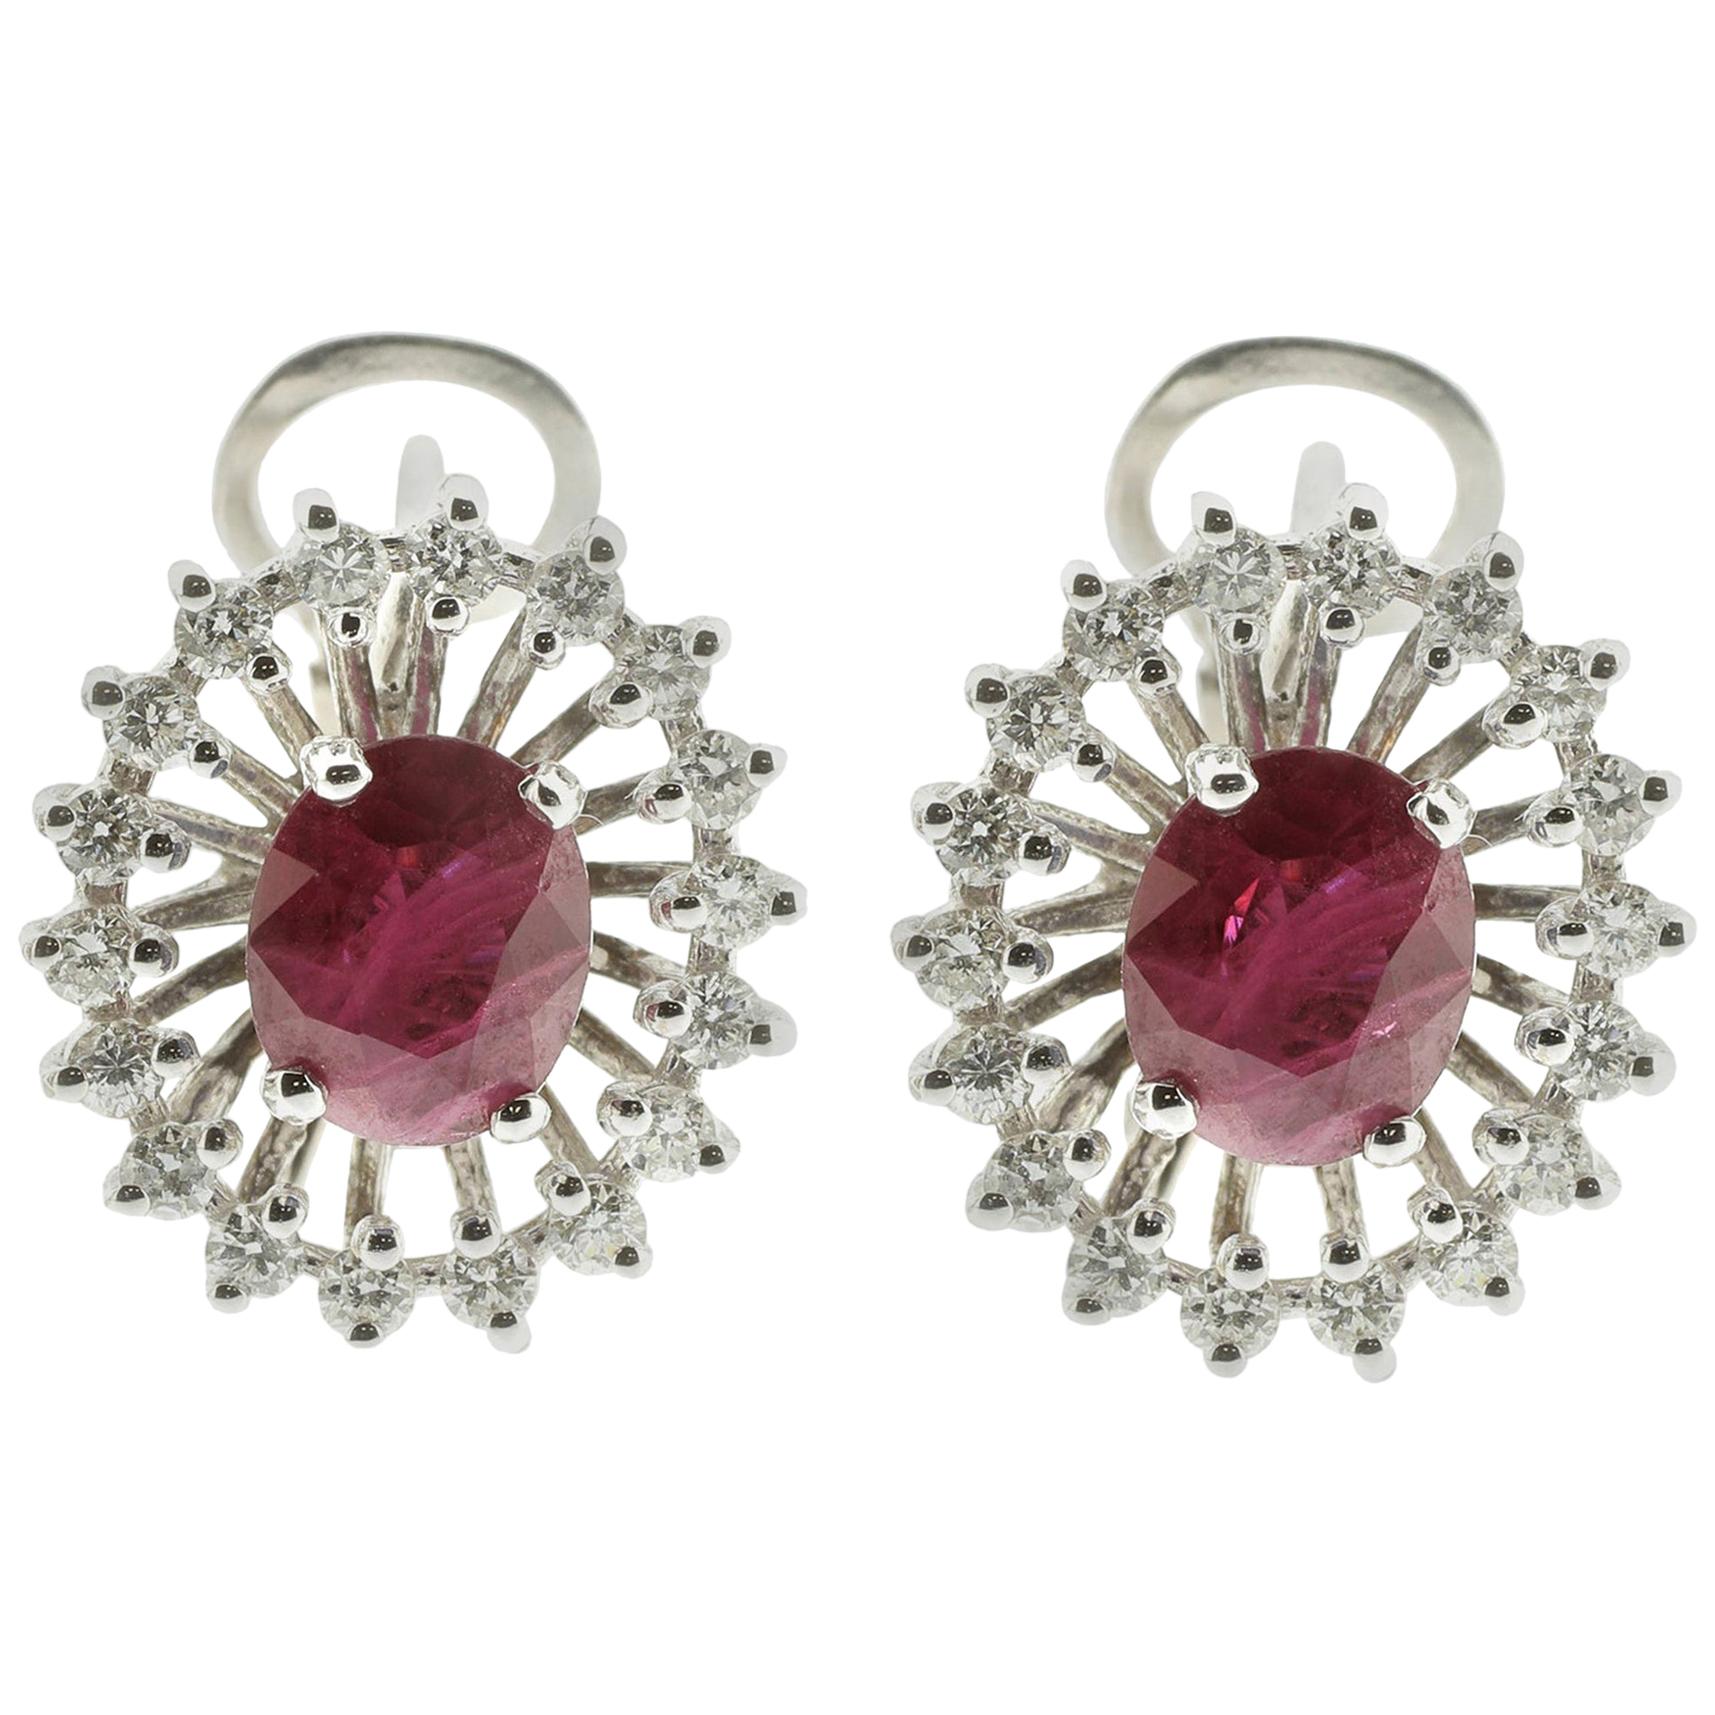 Contemporary 18 Karat White Gold Diamond ( G VS) and Ruby Post and Clip Earrings